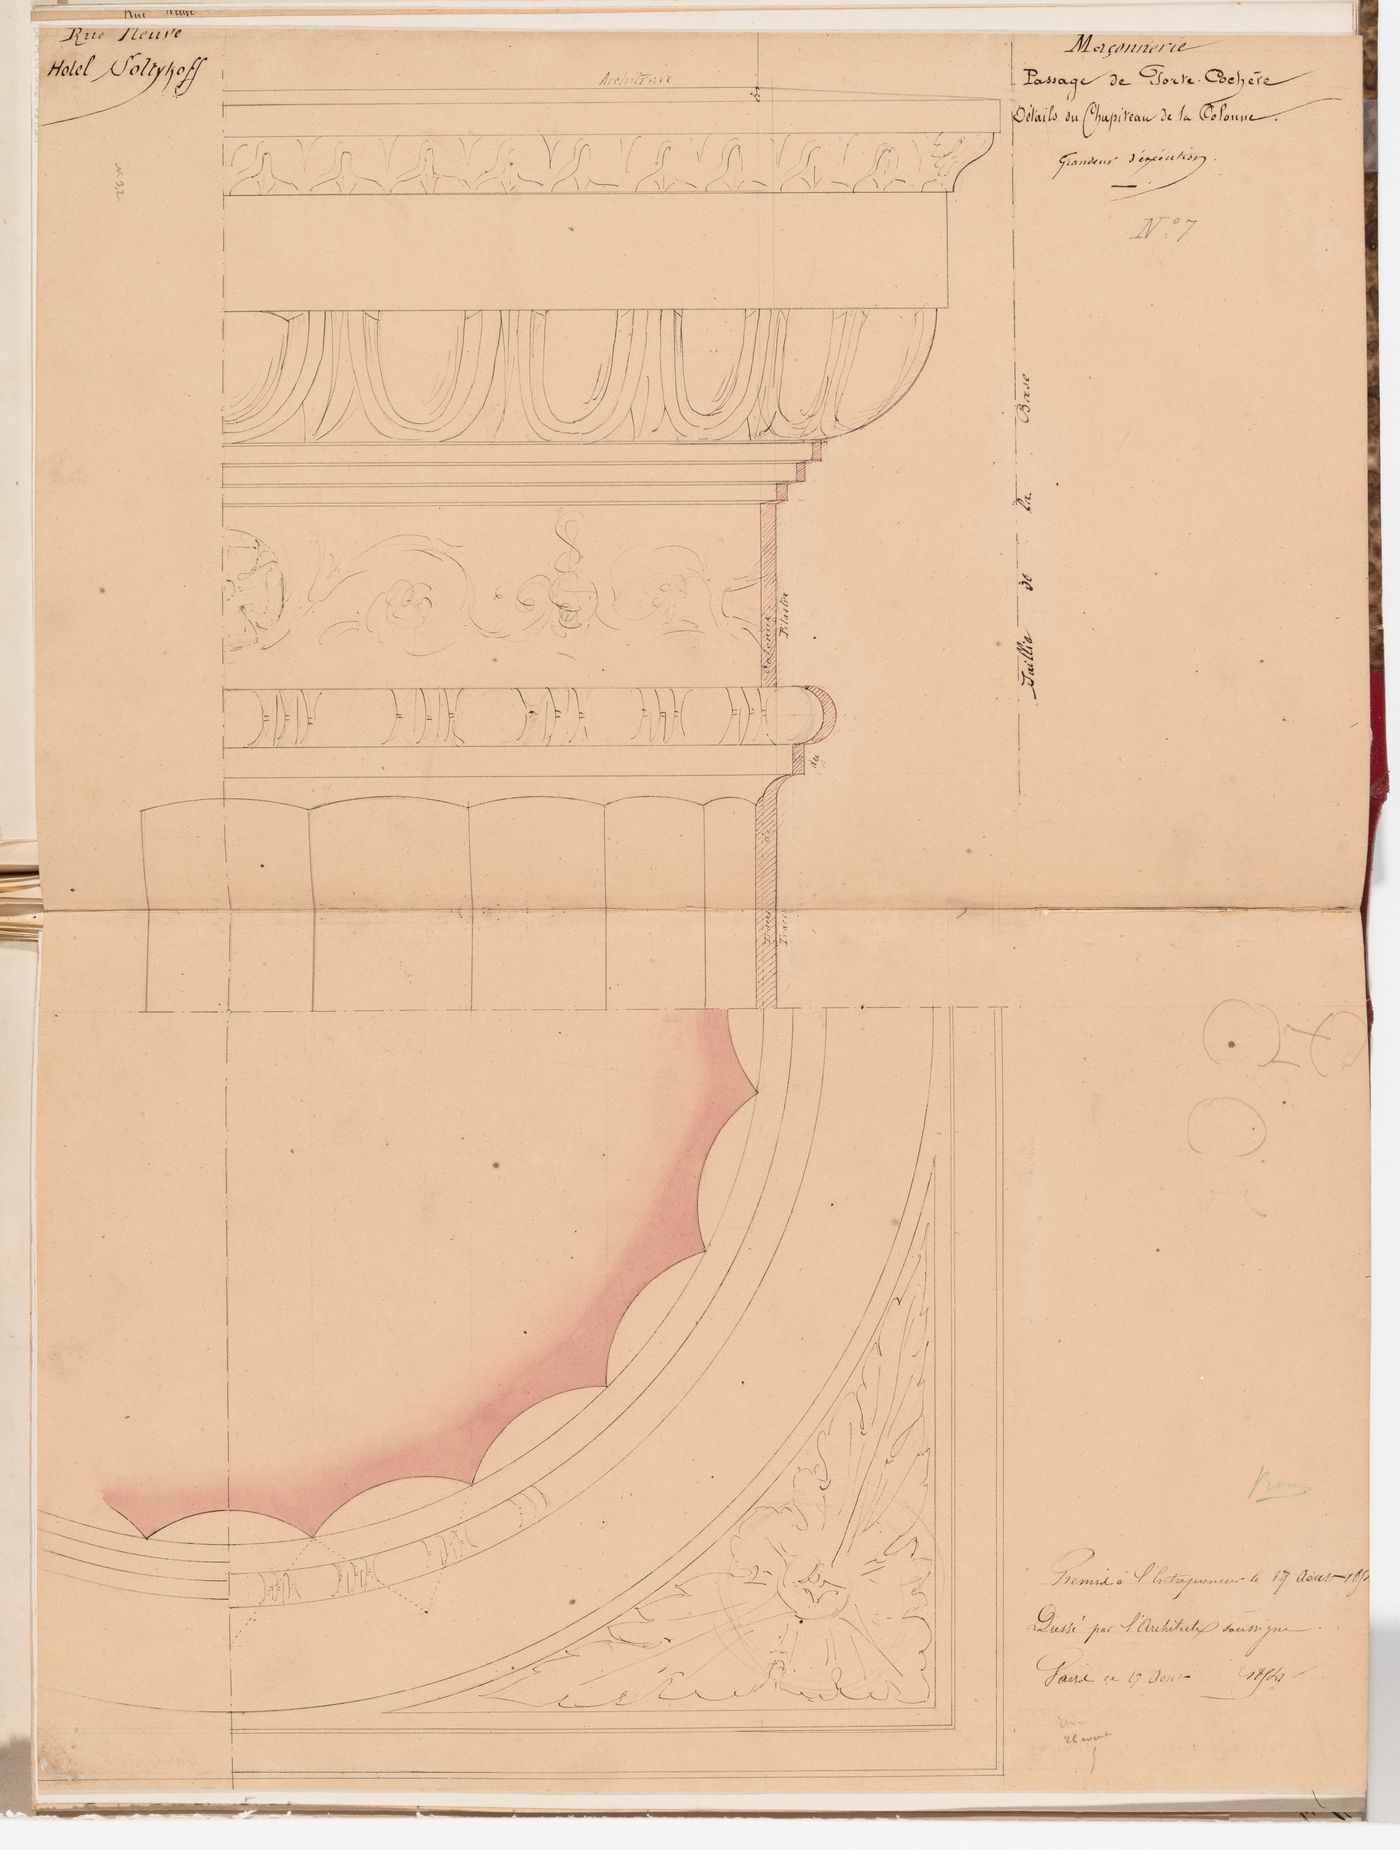 Full-scale half elevation and partial reflected plan for the capital and the upper shaft of the columns for the porte cochere, Hôtel Soltykoff